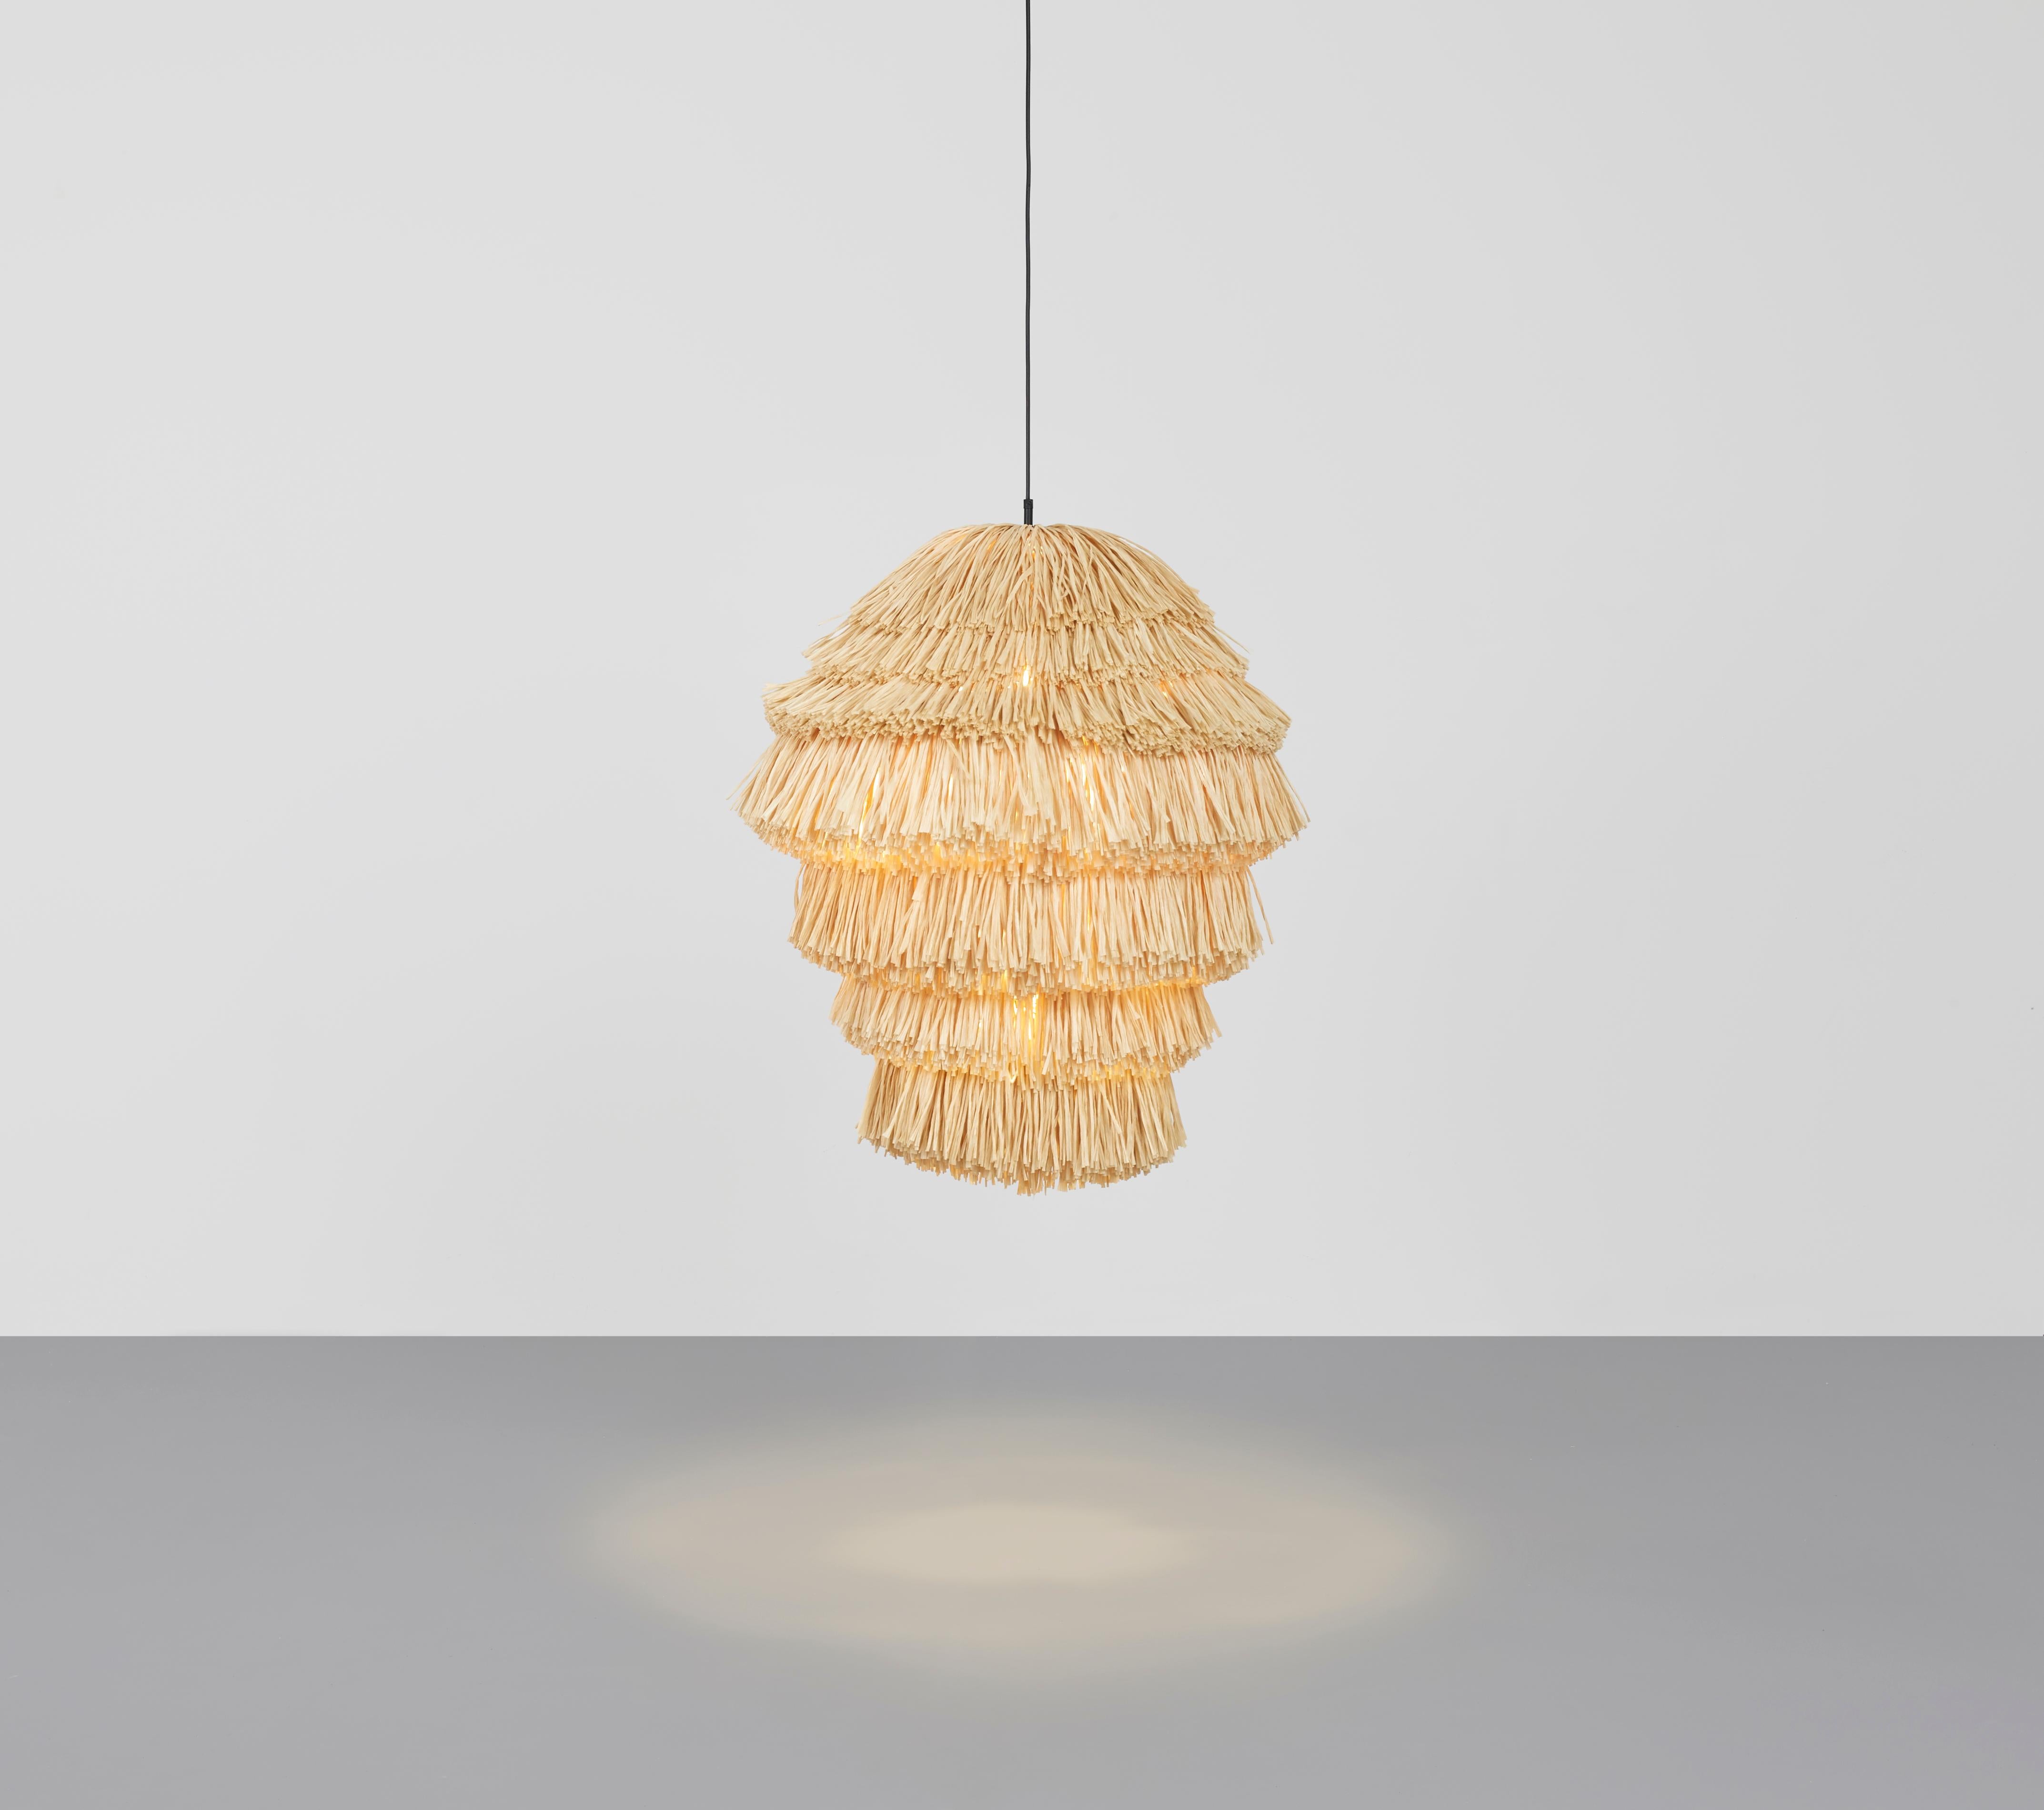 Fran as lamp by Llot Llov
Handcrafted light object
Dimensions: Ø 65 cm x H: 90 cm
Materials: raffia fringes
Colour: beige
Also available in green, red, black. 

With their bulky silhouette and rustling fringes, the FRAN lights are reminiscent